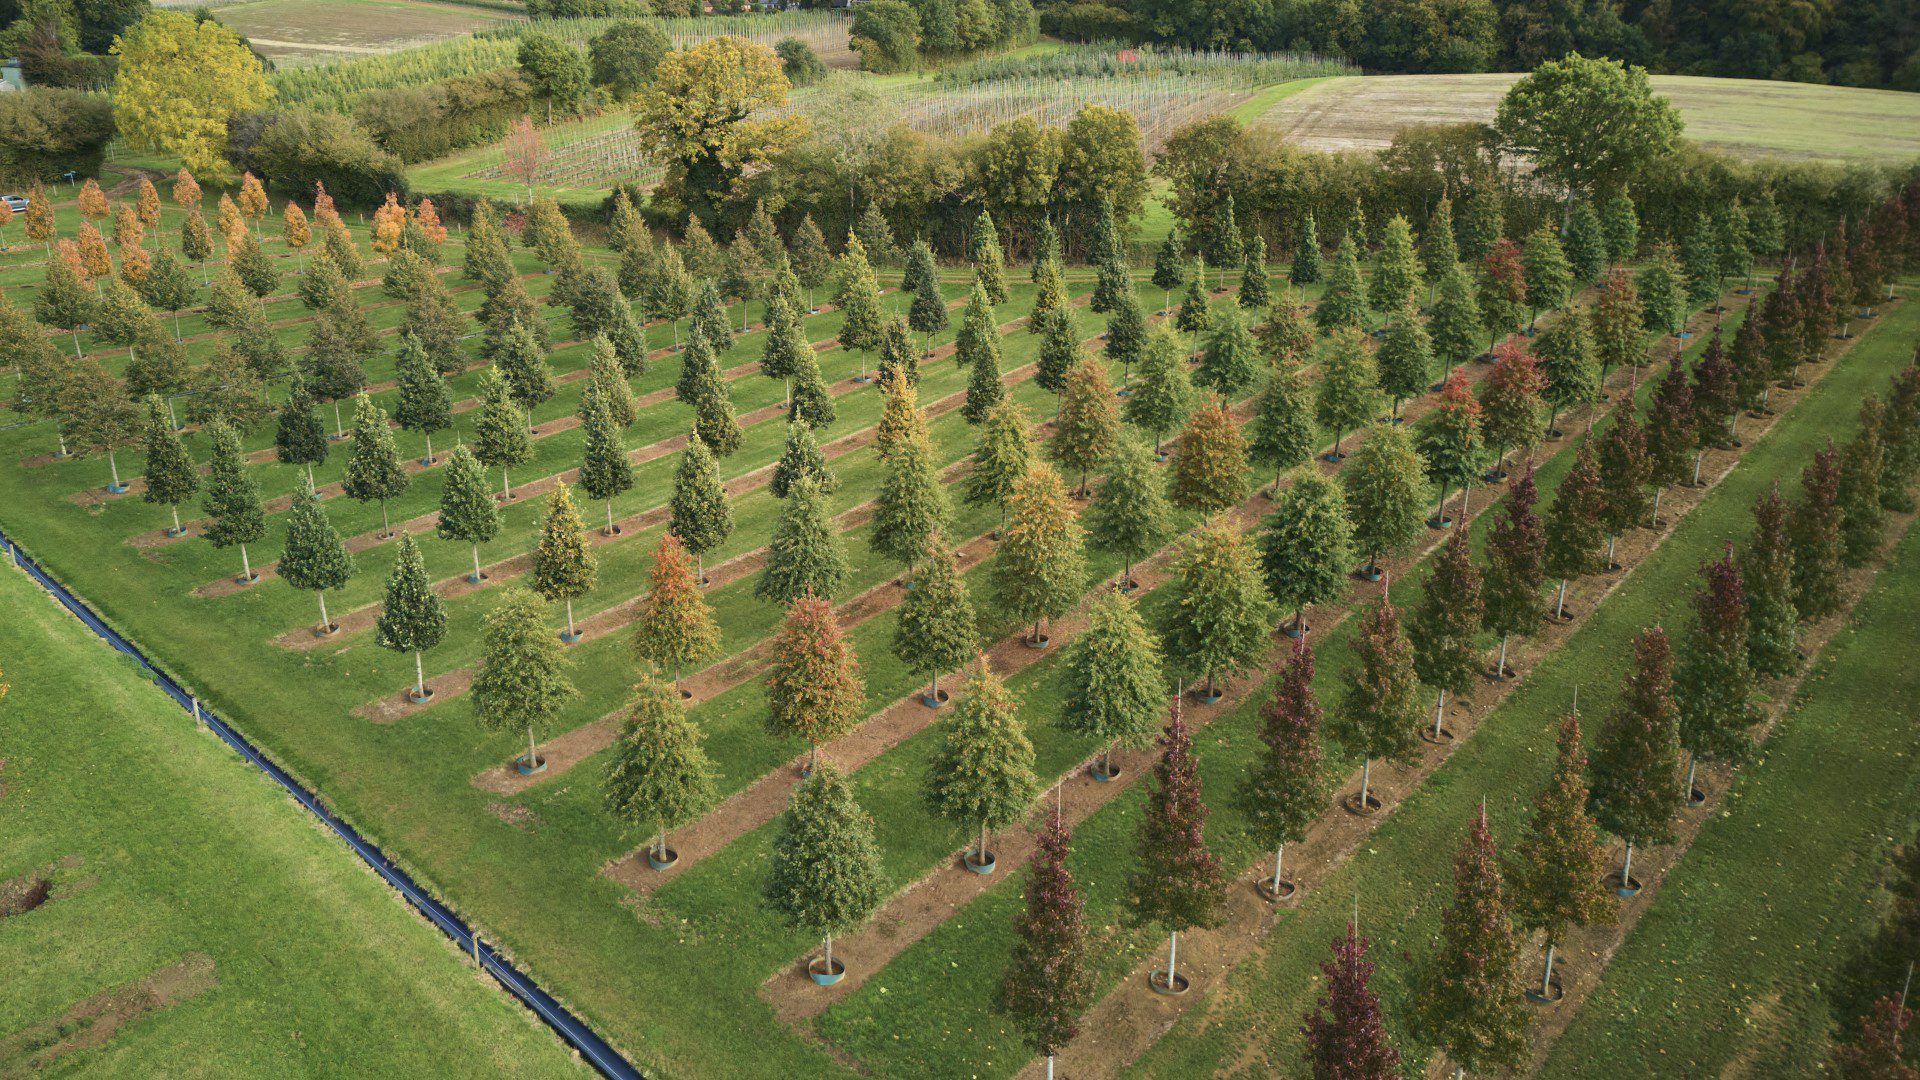 drone view of a tree planting nursery in autumn